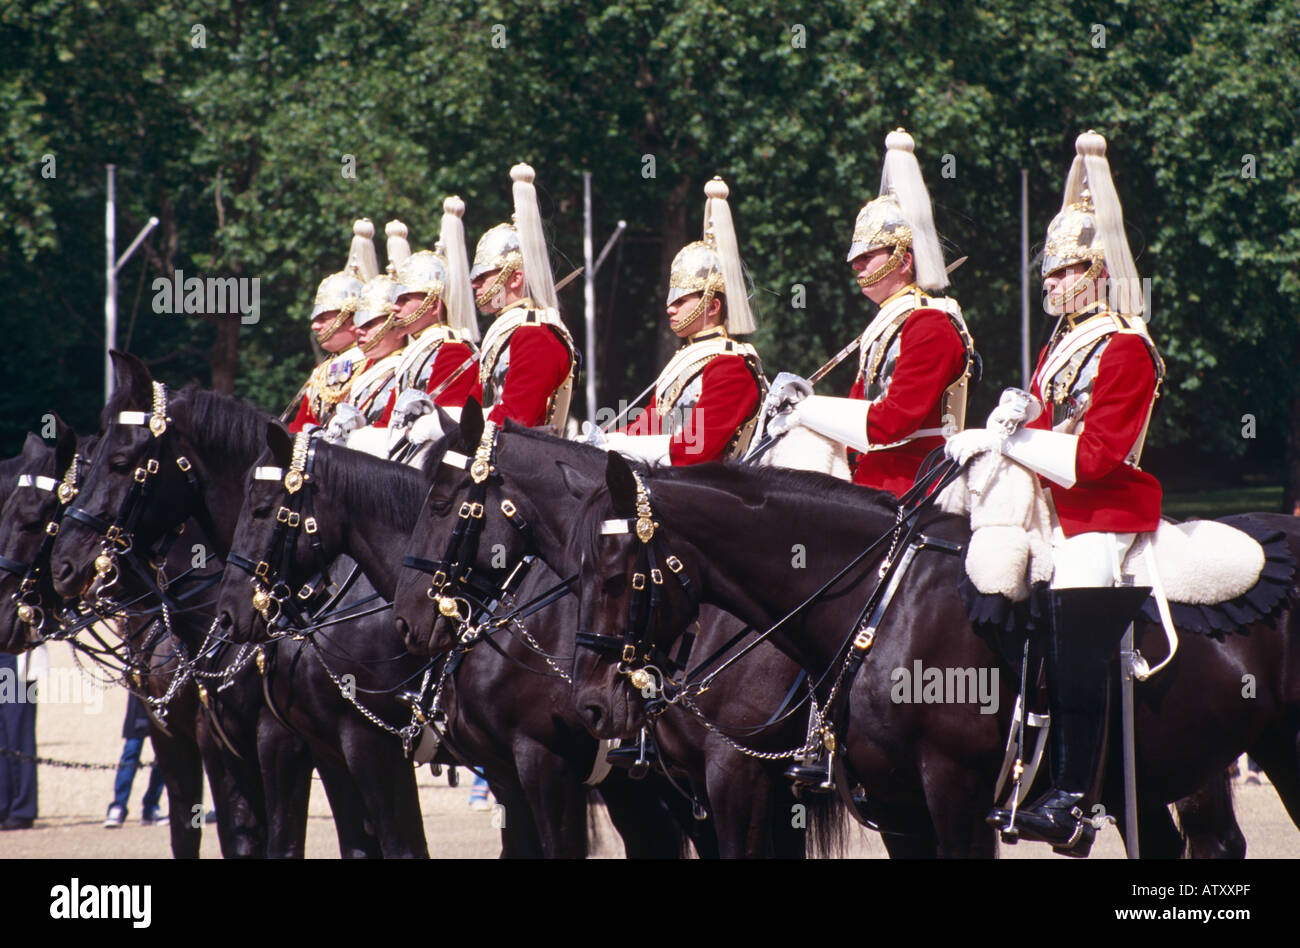 Horse guards on horses, changing of the guard, Horse Guards Parade, Whitehall, London, England Stock Photo